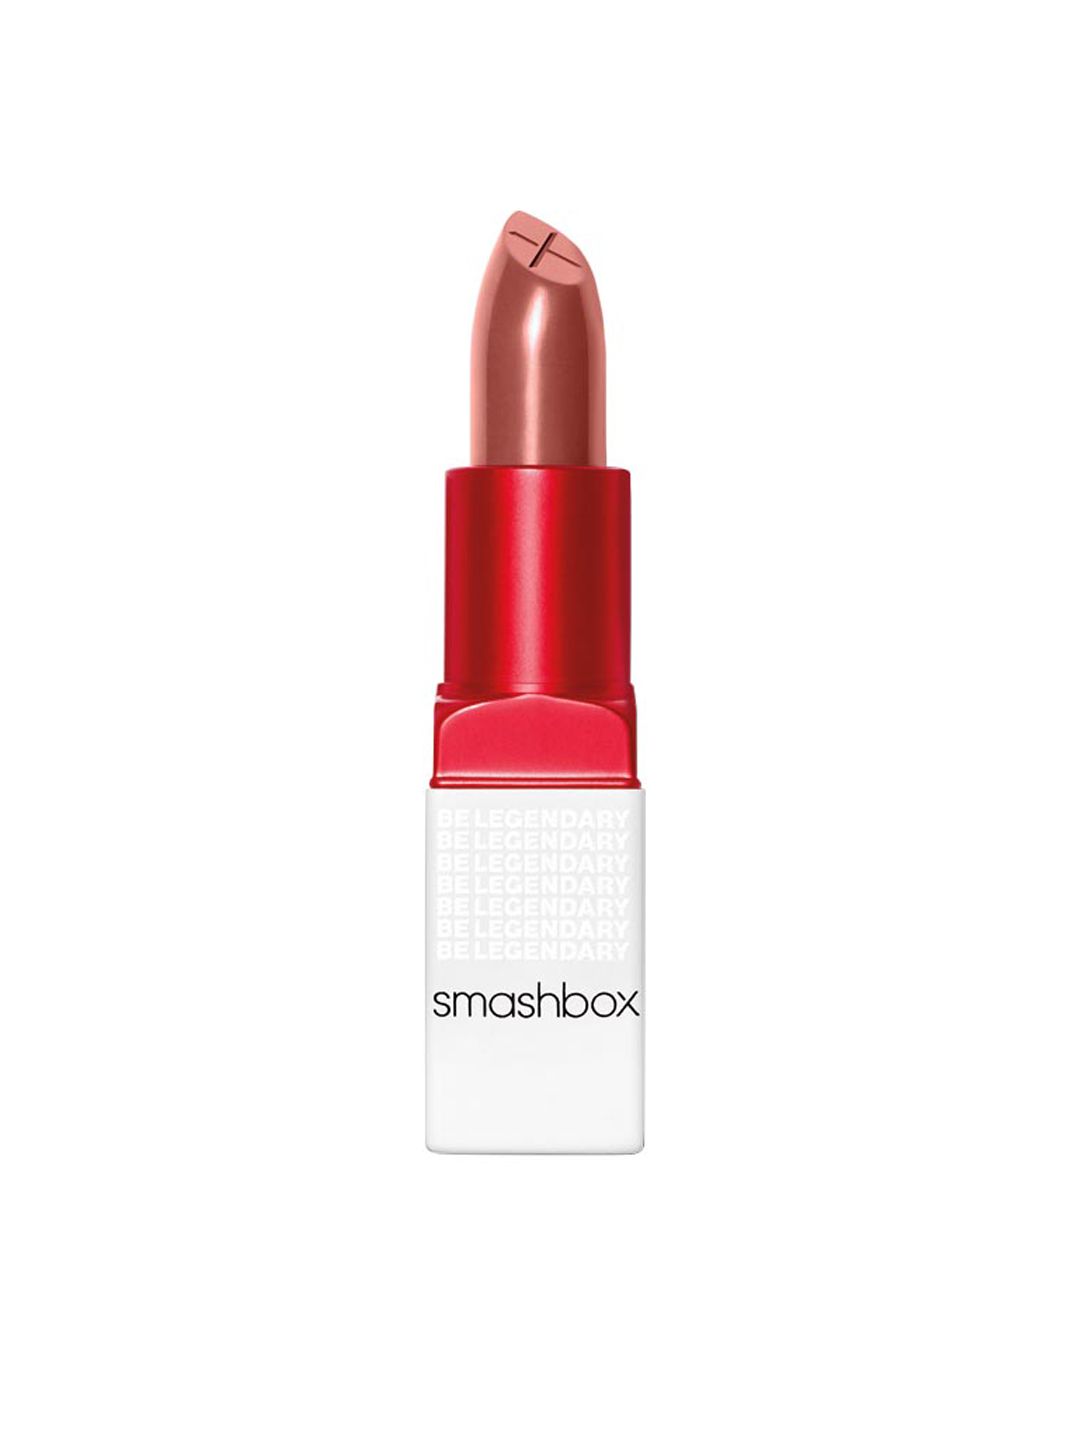 Smashbox Be Legendary Prime & Plush Lipstick- Stepping Out Price in India